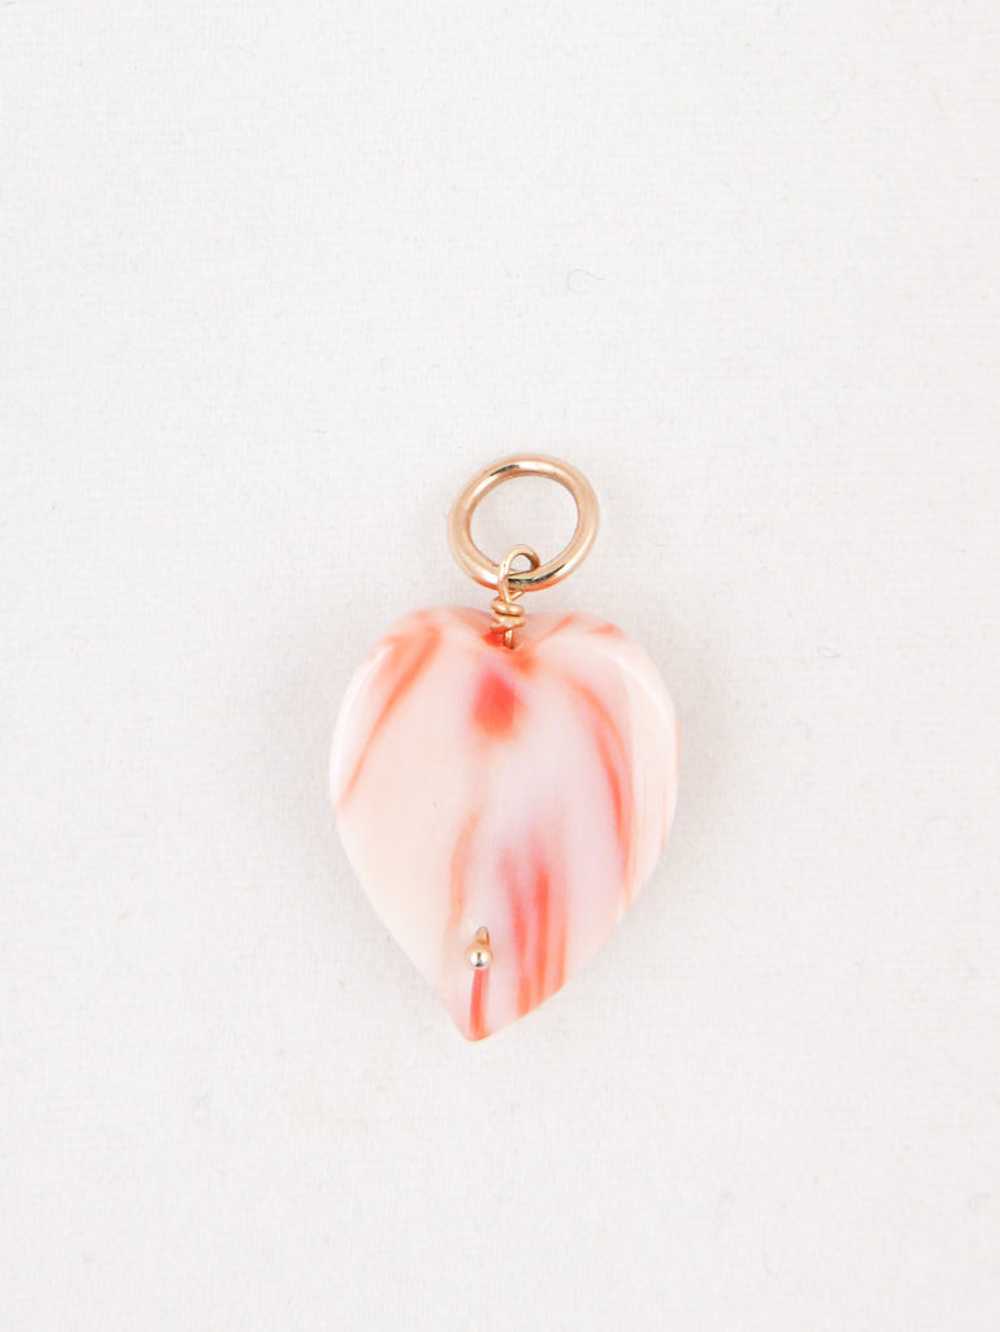 Carved Coral Heart Charm - image 4